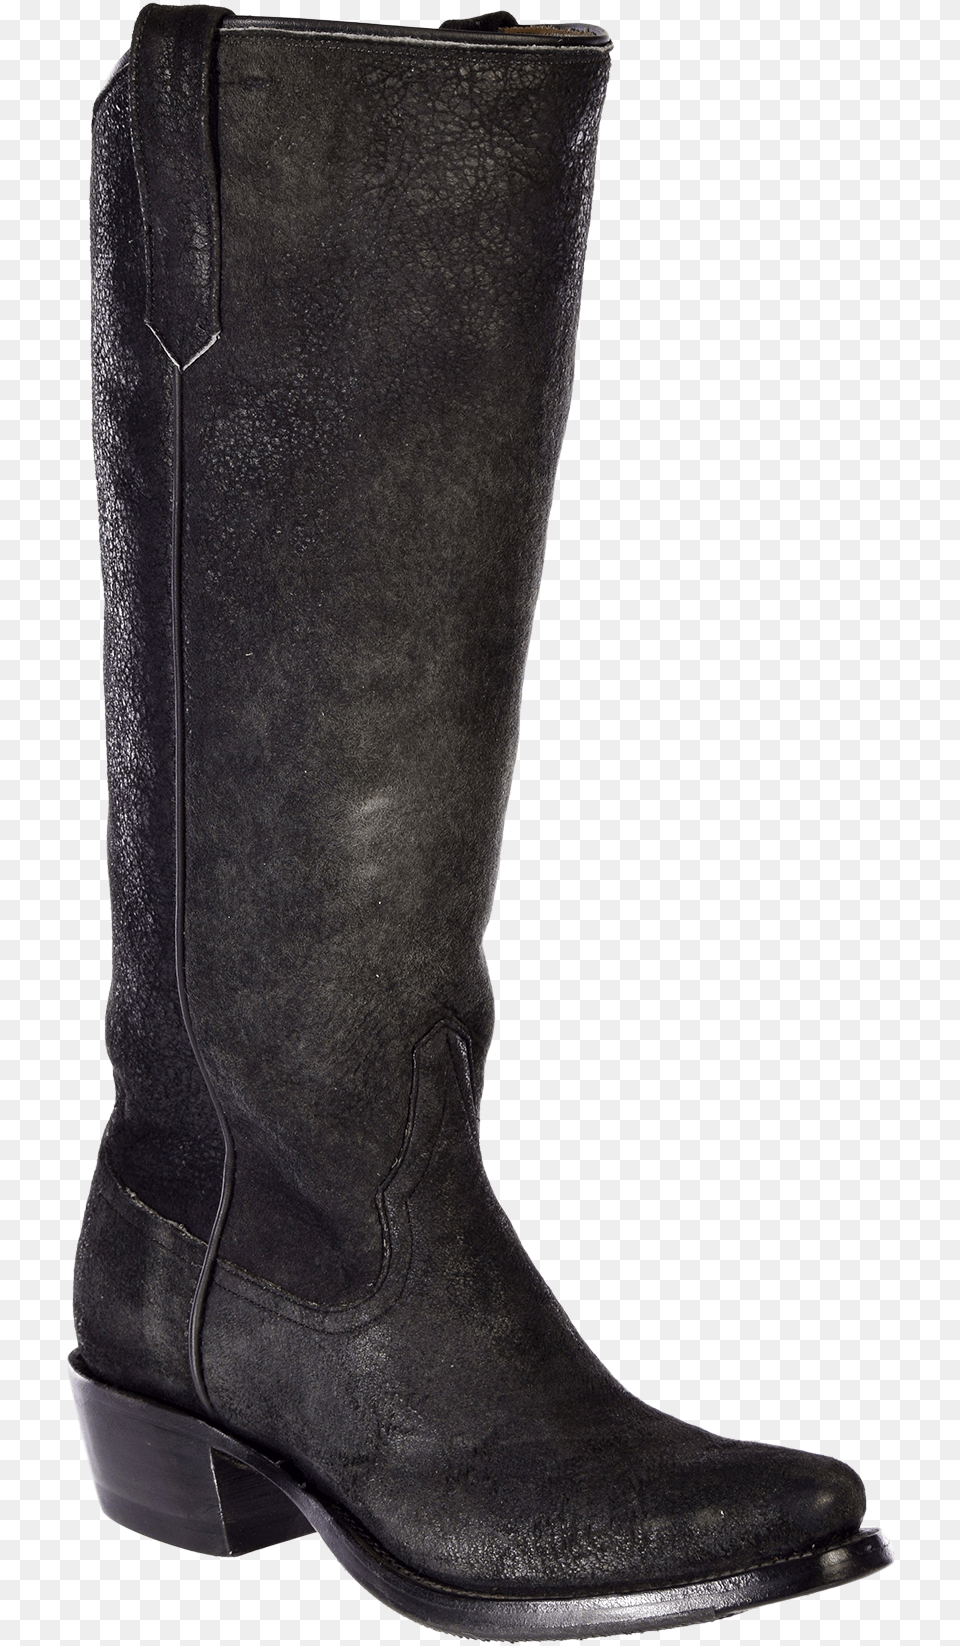 Rios Of Mercedes Women39s Tall Black Picasso Tall Rio Of Mercedes Boots, Clothing, Footwear, Shoe, Boot Png